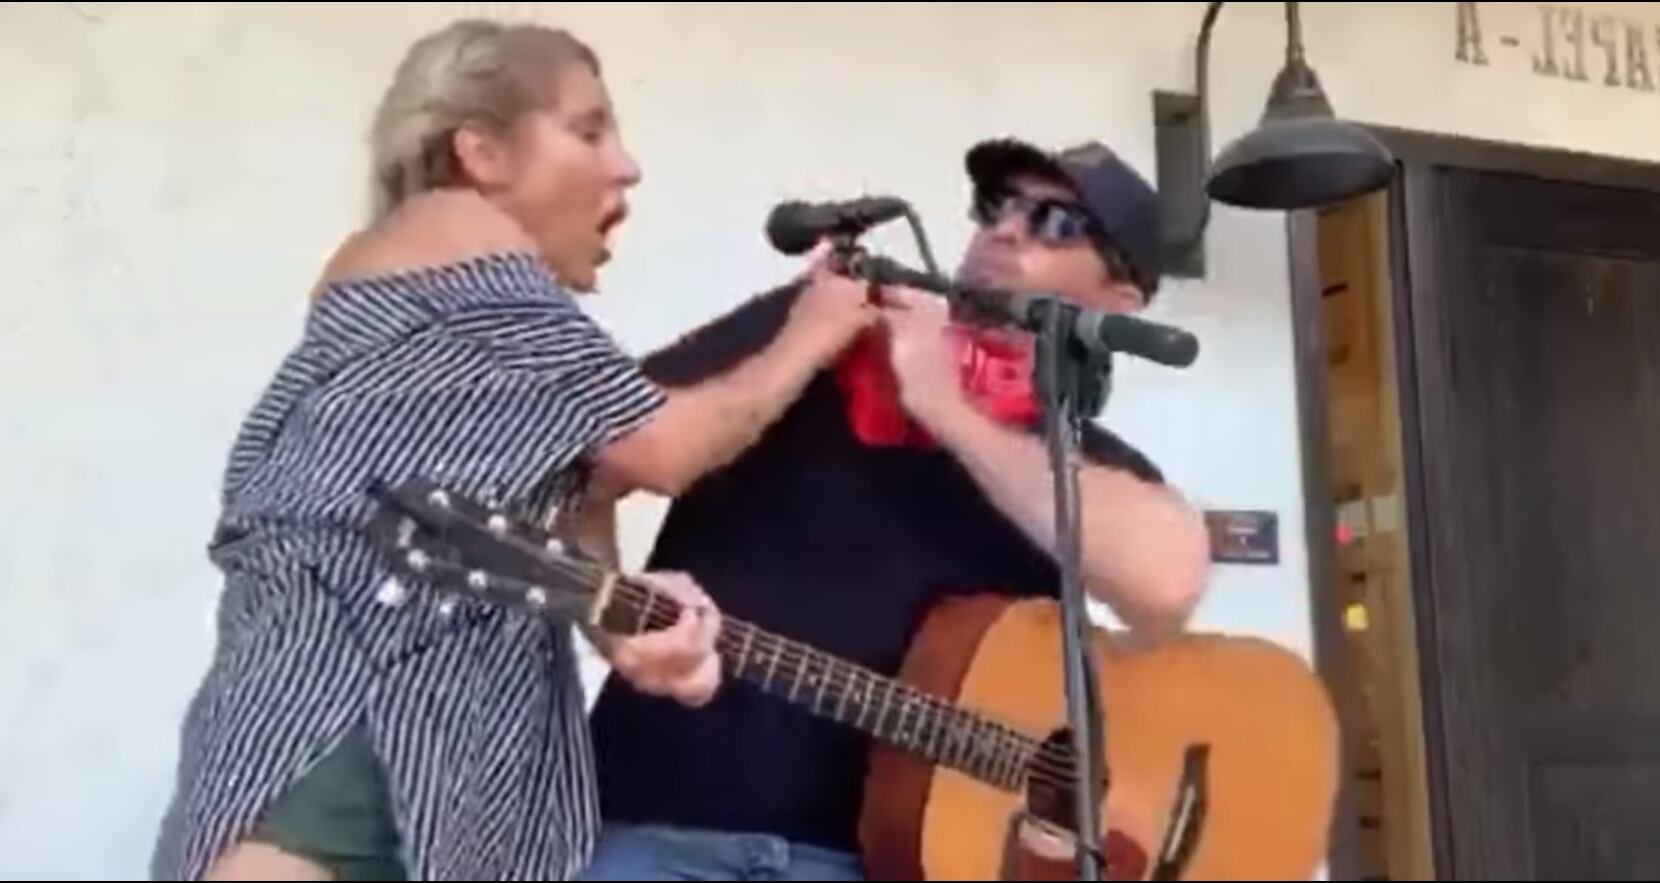 A woman appeared to cough on musician Clayton Gardner after he asked her to move away from...